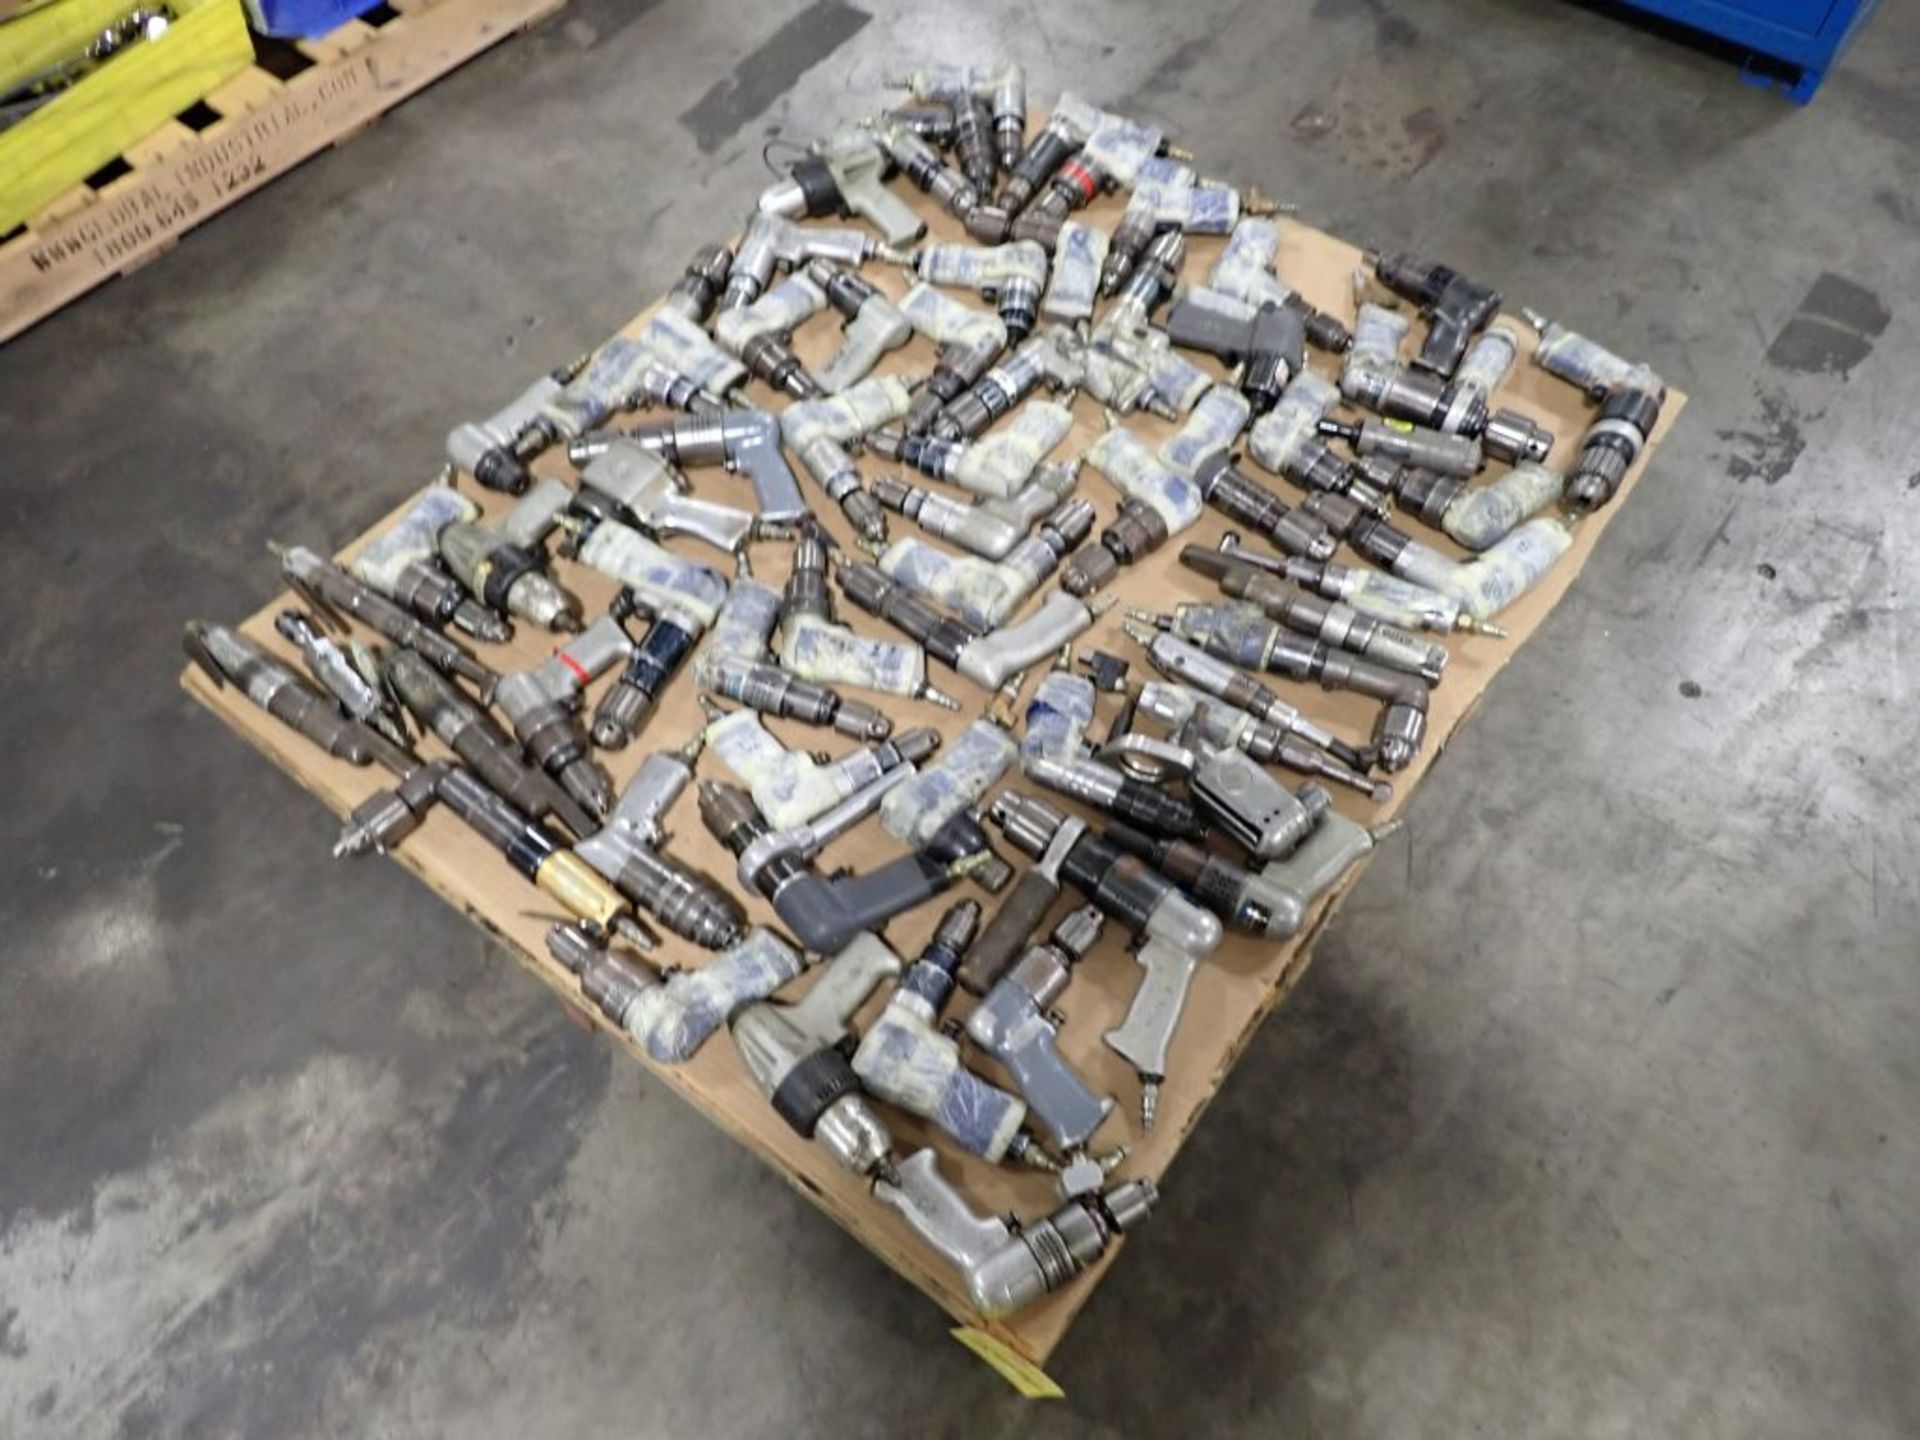 Lot of Pneumatic Tools | Tag: 241504 | Limited Forklift Assistance Available - $10.00 Lot Loading